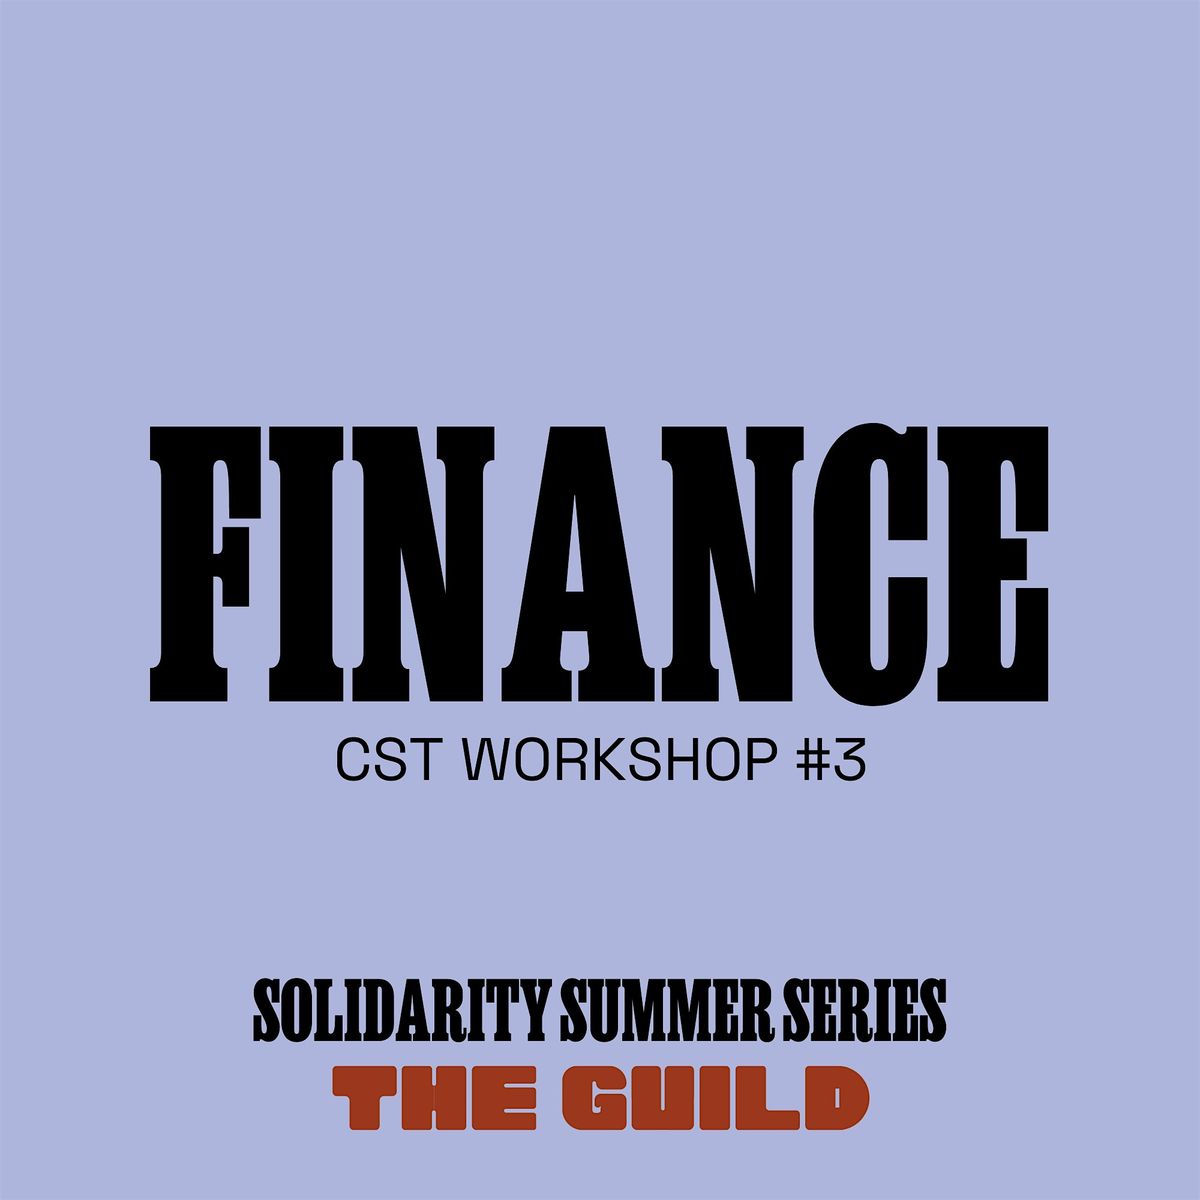 Solidarity Series: FINANCE & COMMUNITY INVESTMENT